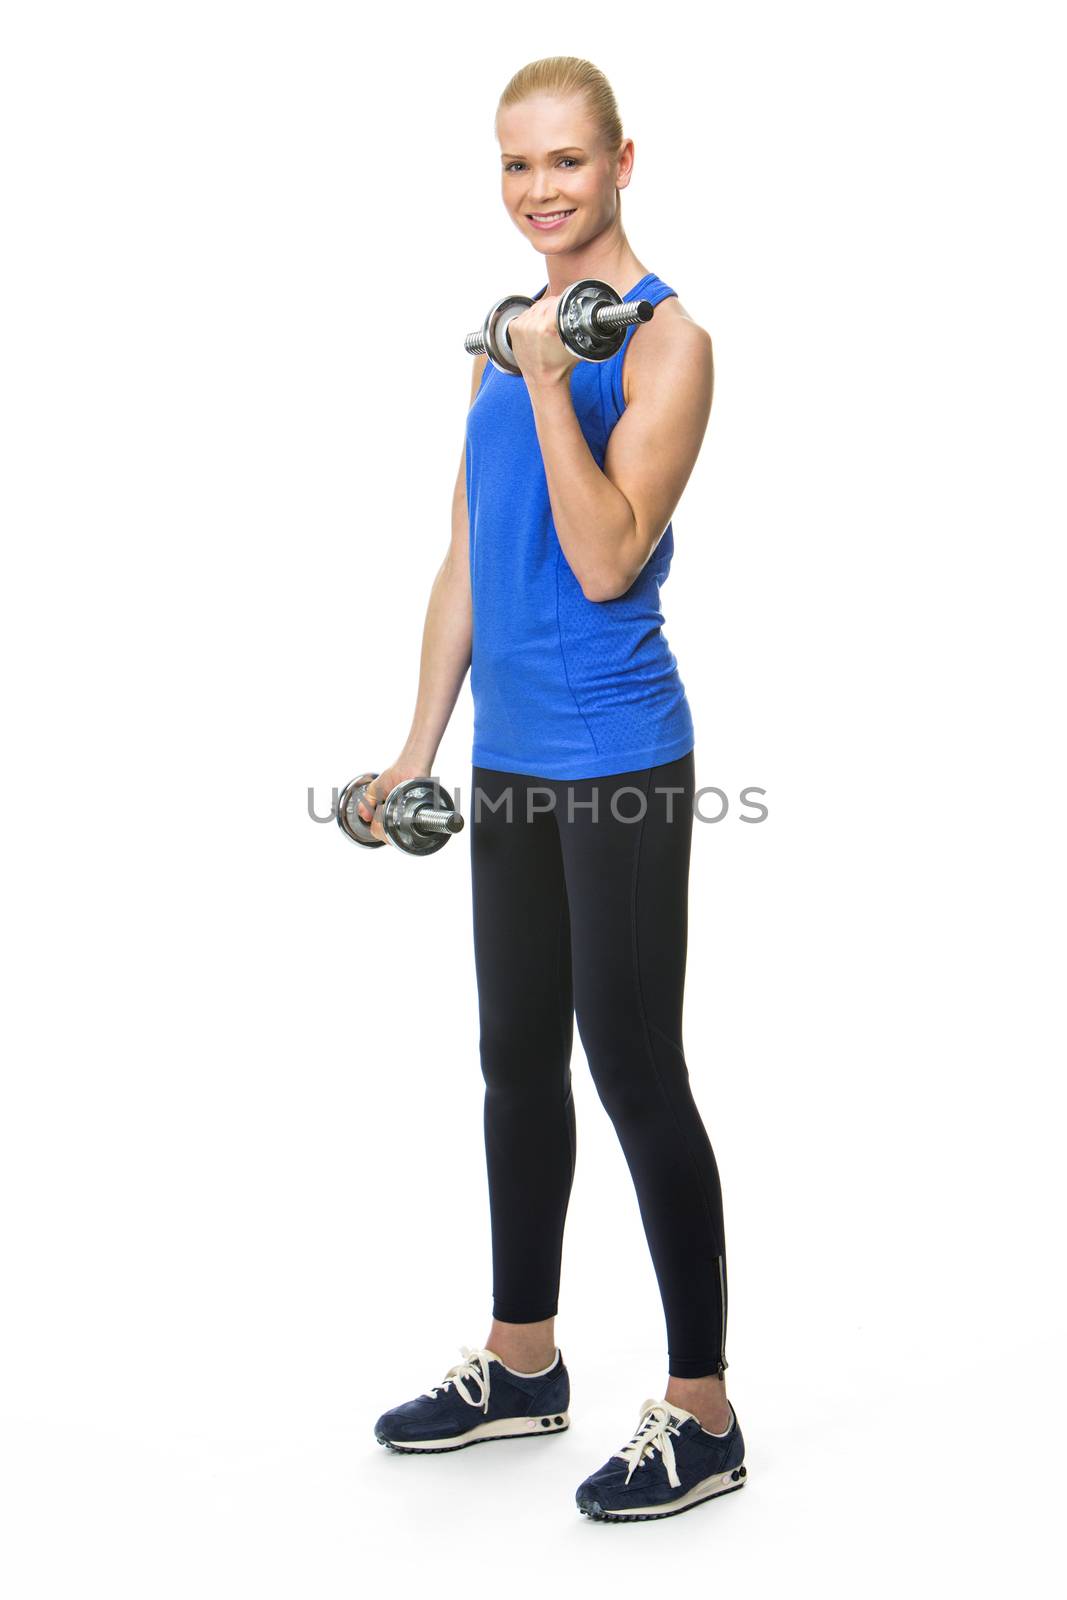 woman exercising with weights by Flareimage